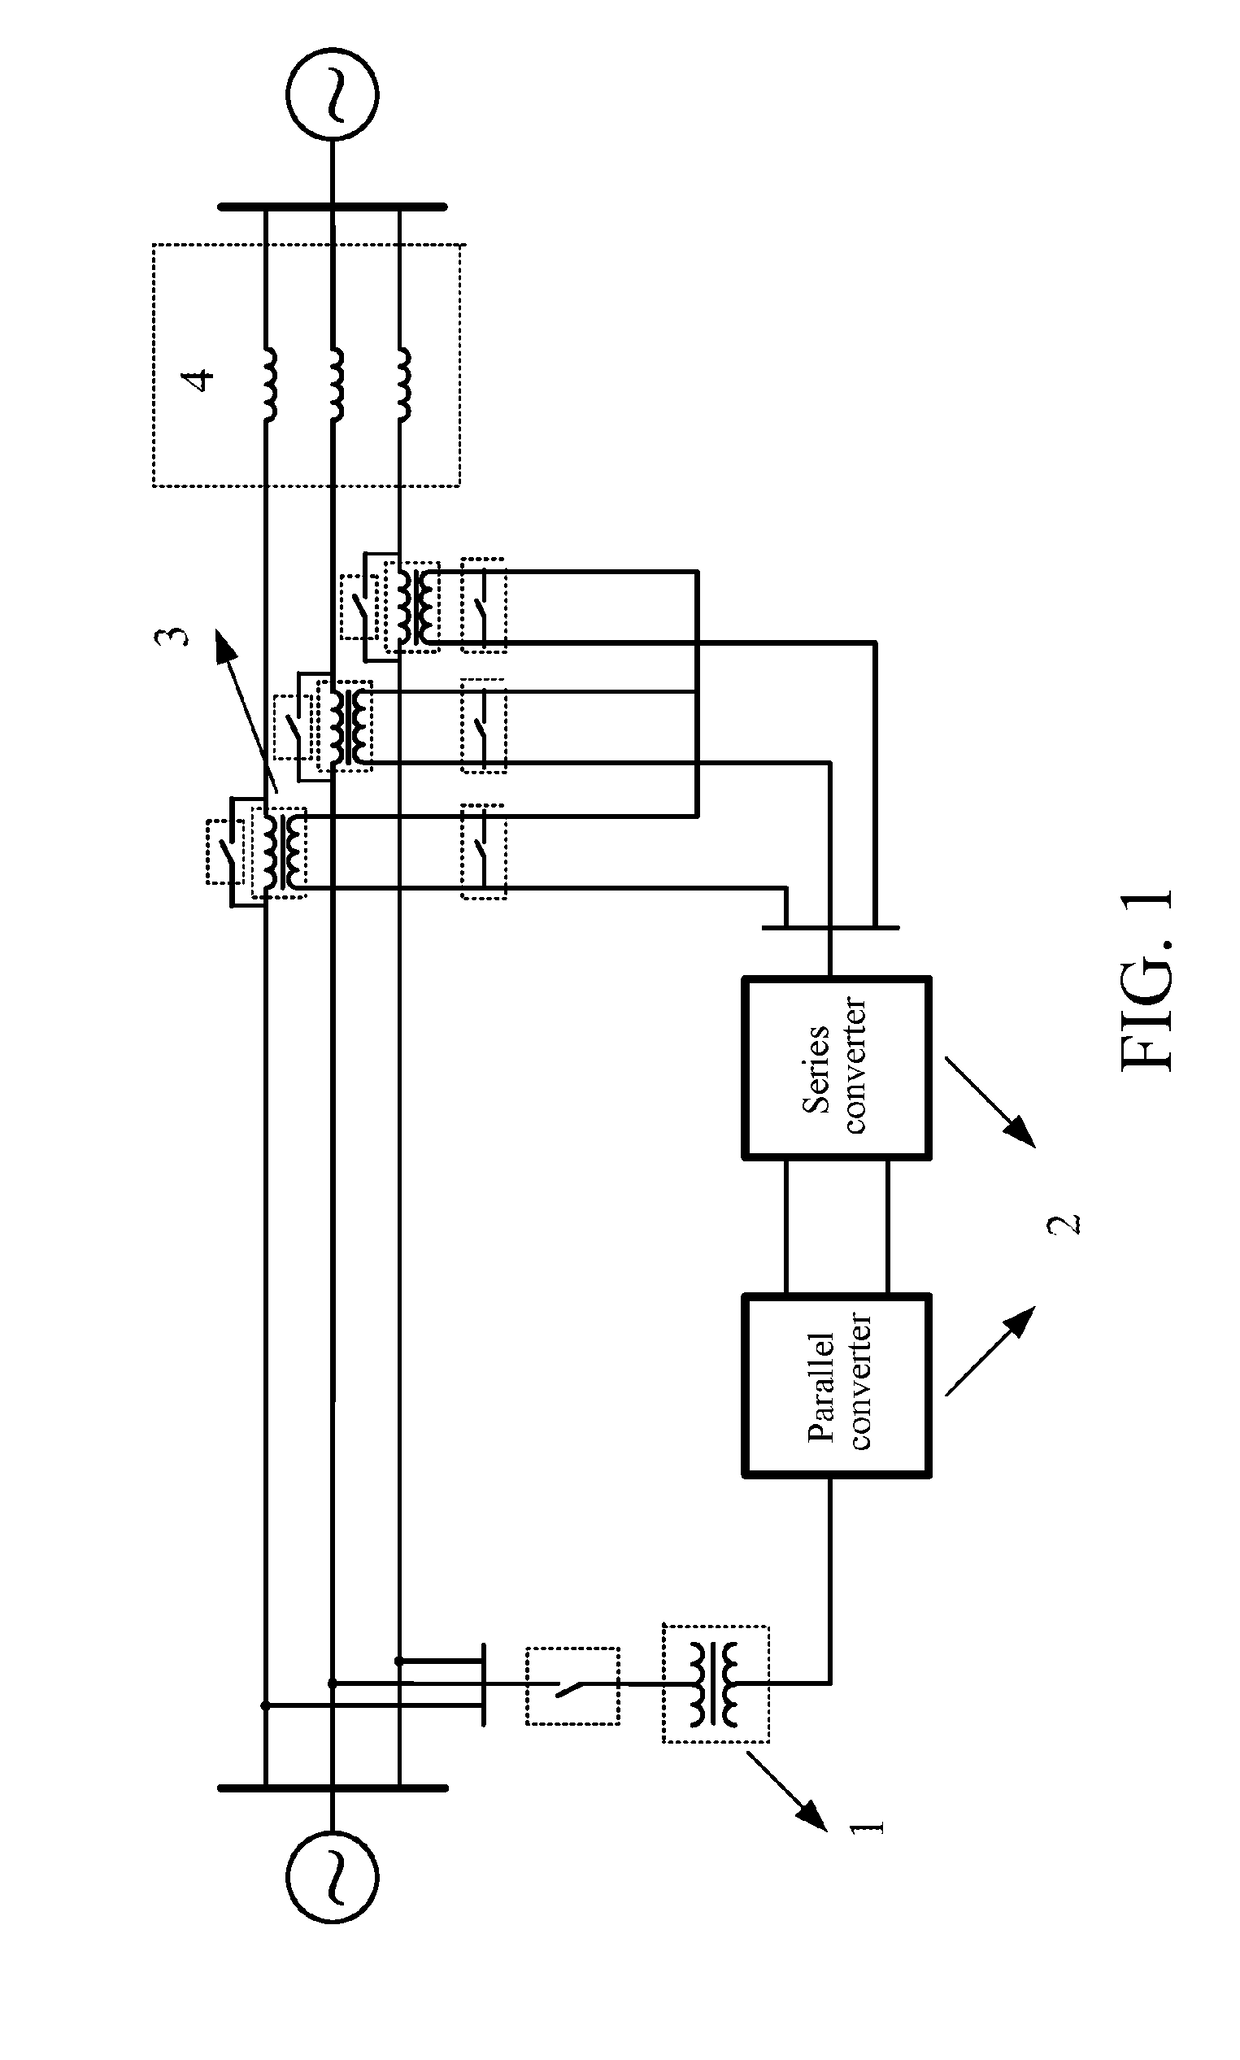 Line power control method and system for unified power flow controller